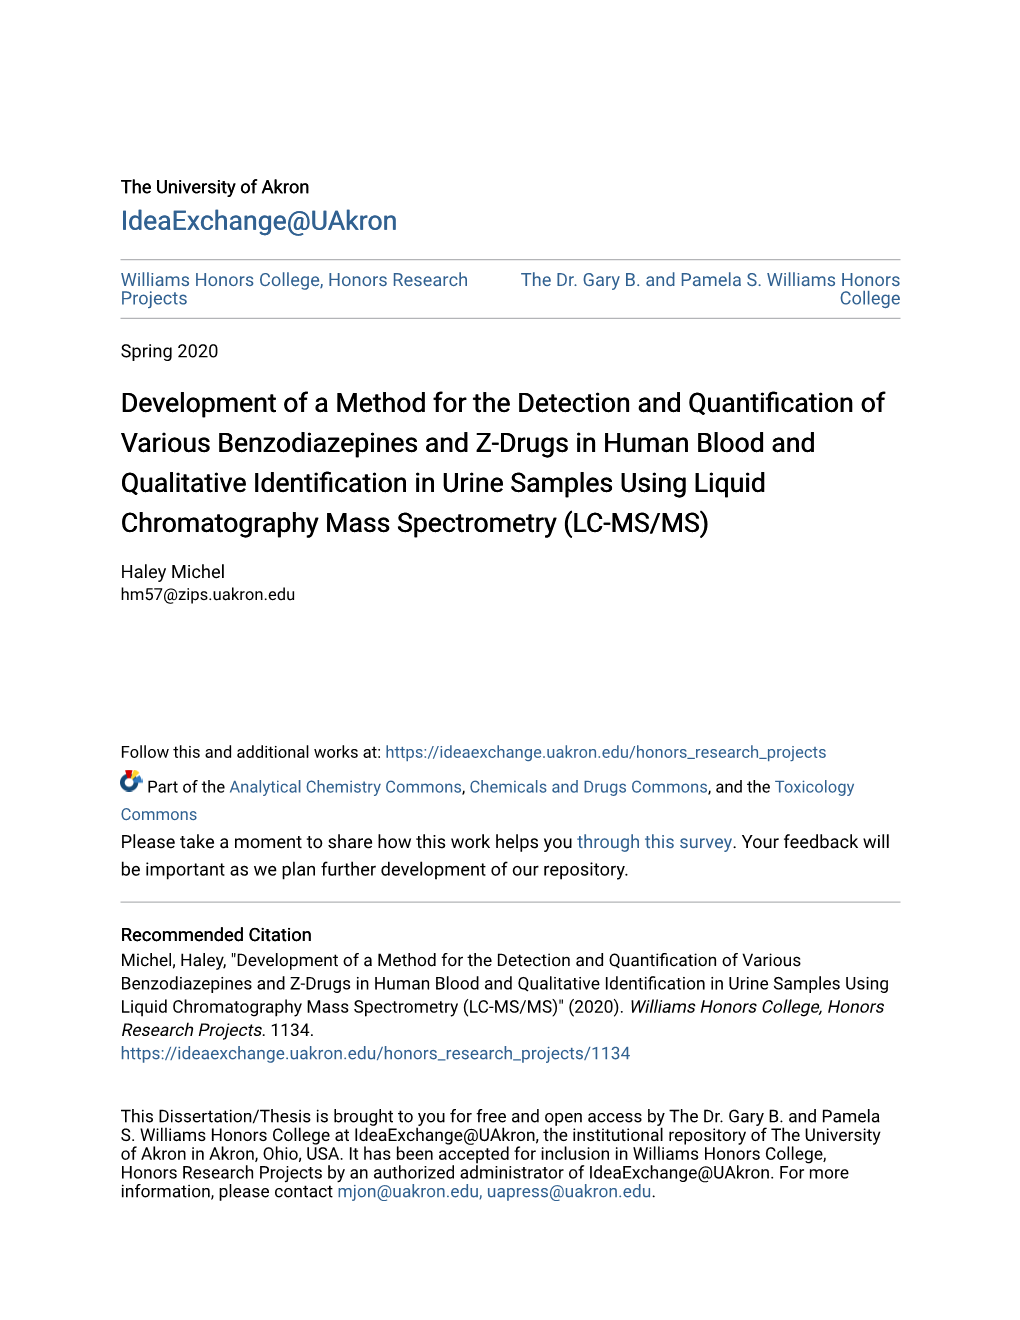 Development of a Method for the Detection and Quantification Of